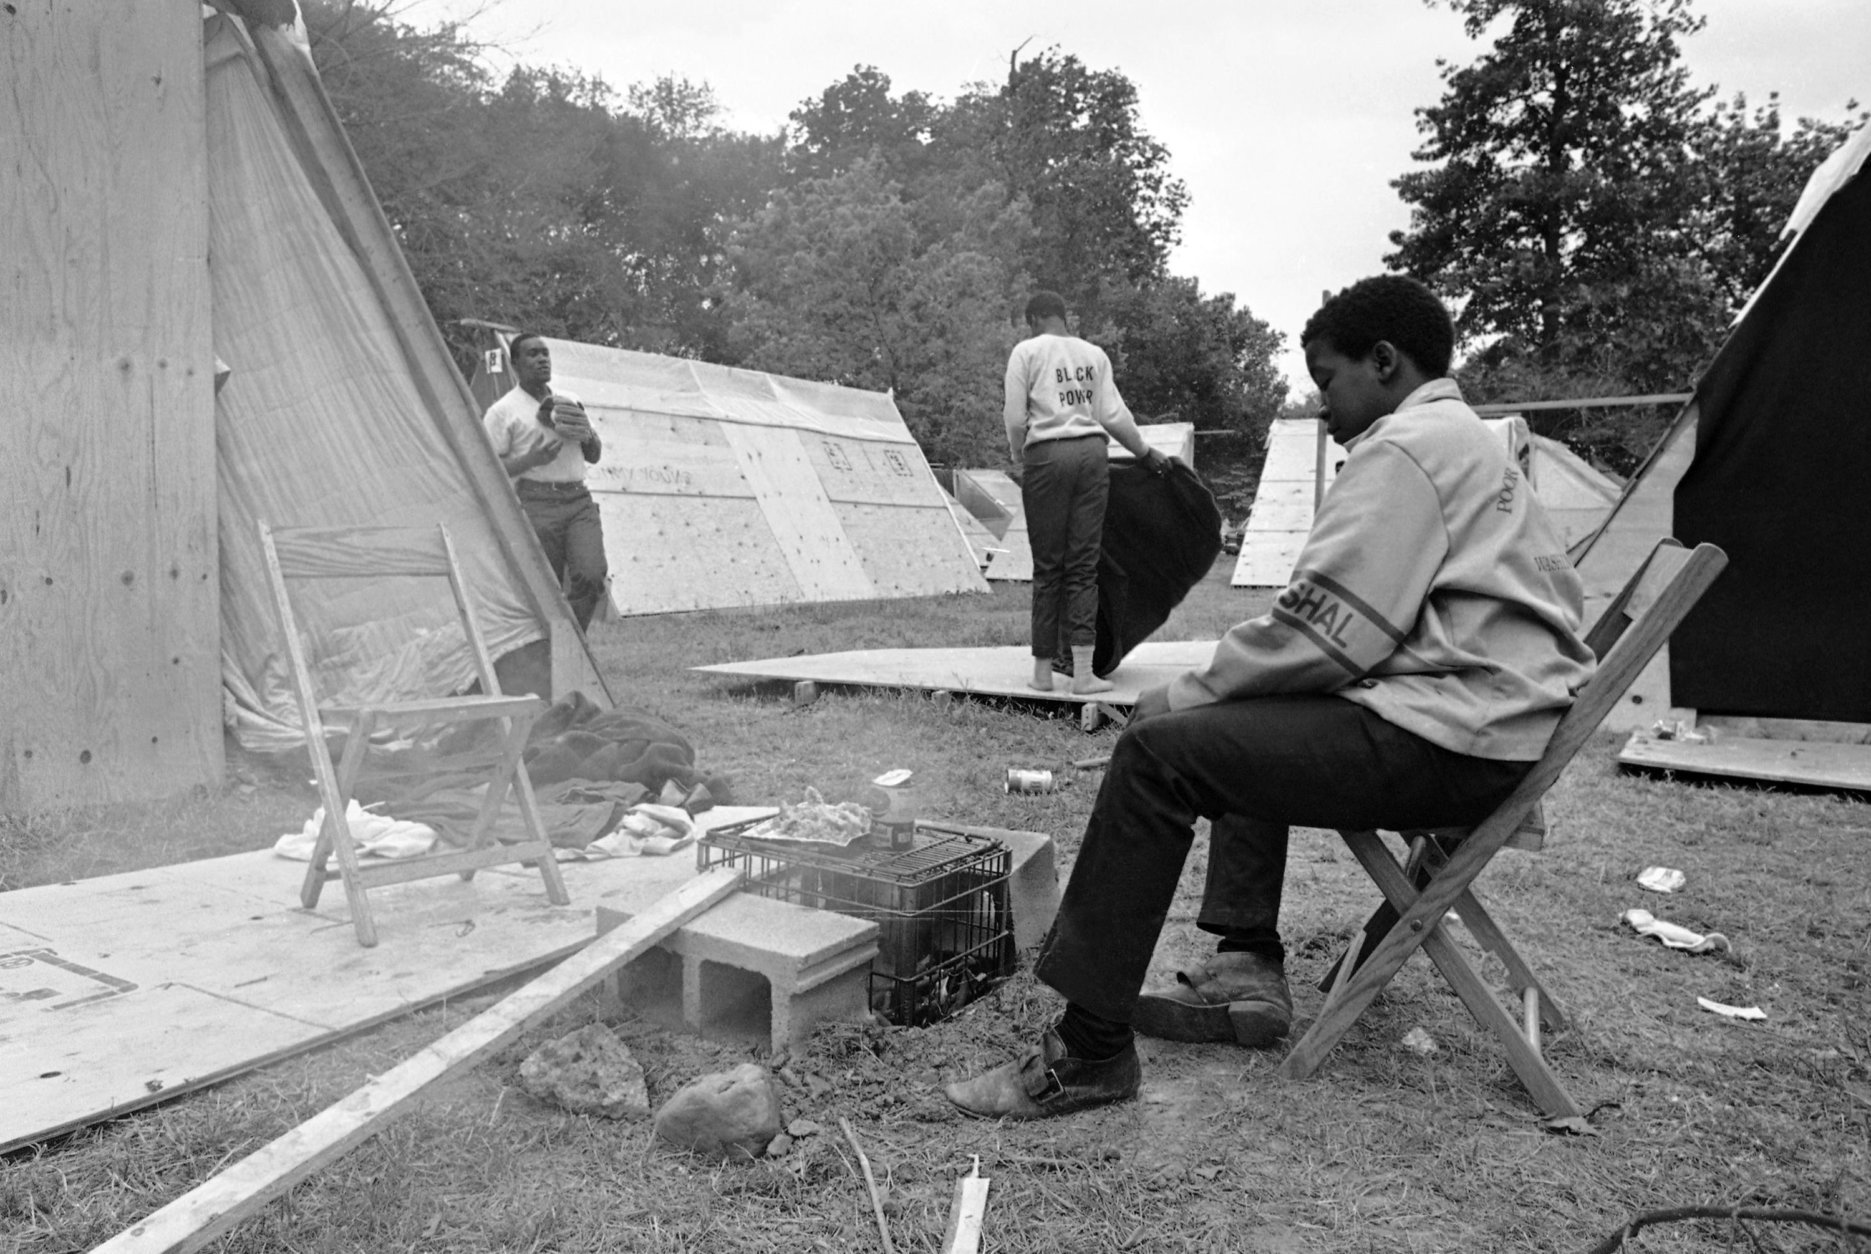 Monroe Johnson, 13, of Milwaukee, Wisconsin, cooks his mid-day meal outdoors in "Resurrection City," the camp site of the Poor People's Campaign in Washington, May 20, 1968. Another resident shakes a blanket amid the plywood shelters which make up the camp. (AP Photo/Bob Schutz)